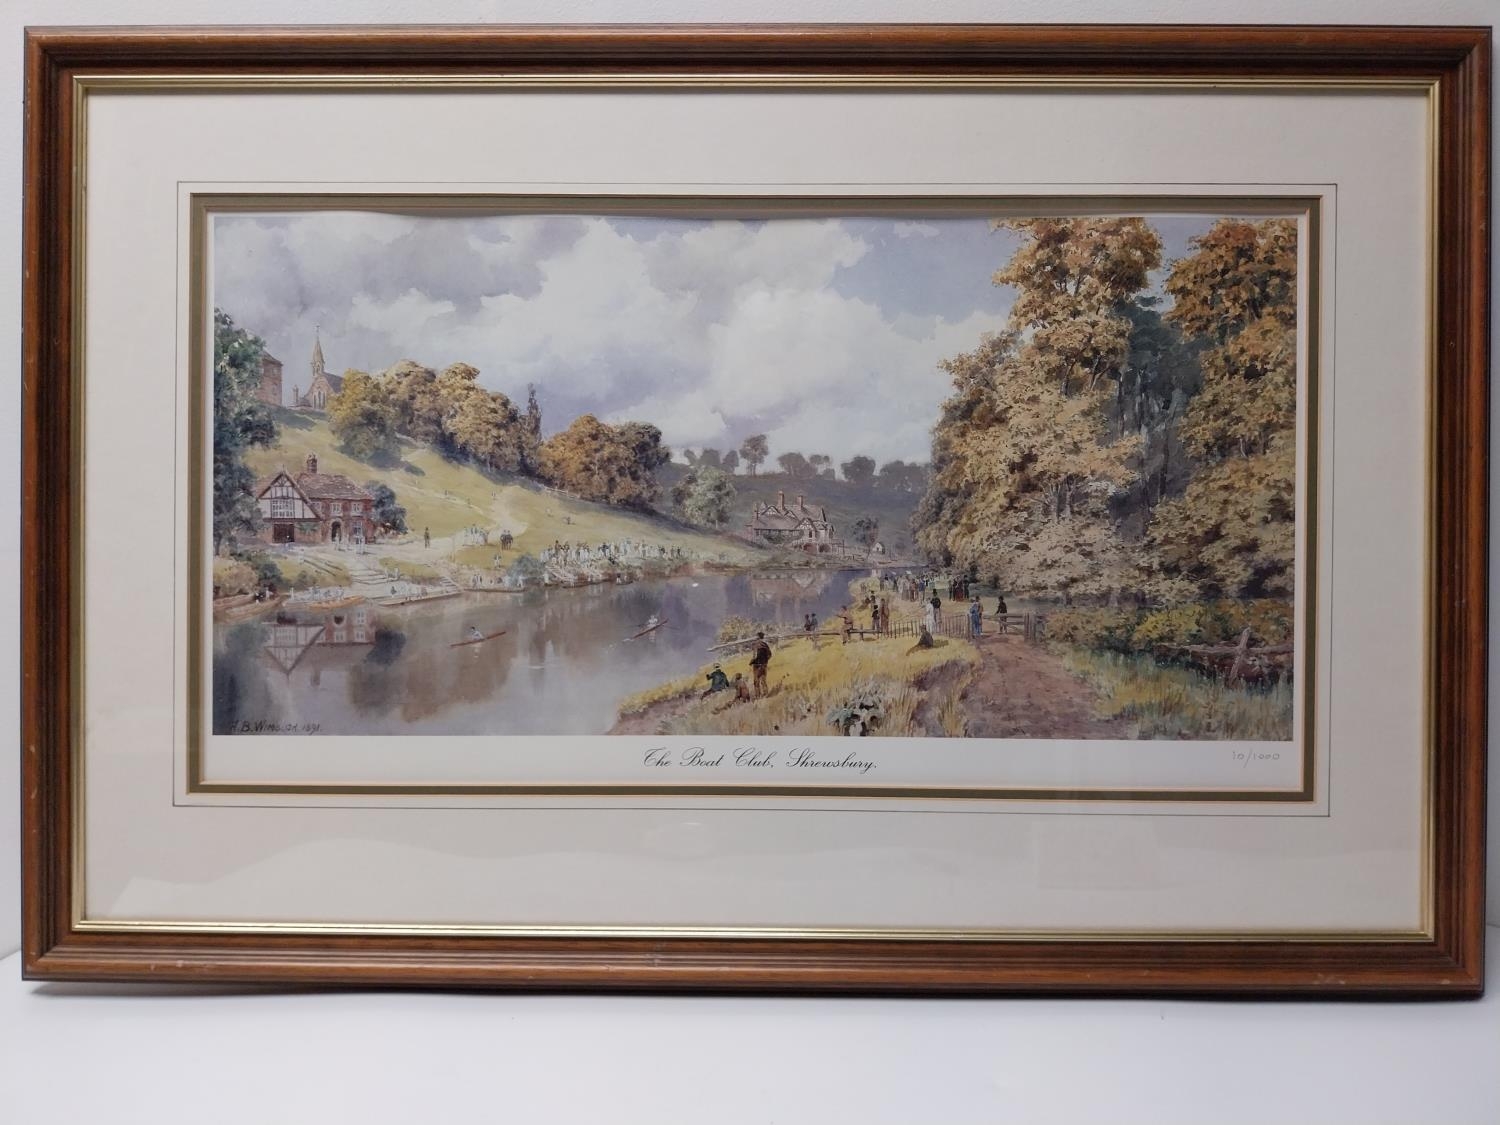 A framed and glazed reproduction of The Boat Club Shrewsbury, H. B. Winbush, numbered in the margin. - Image 2 of 6